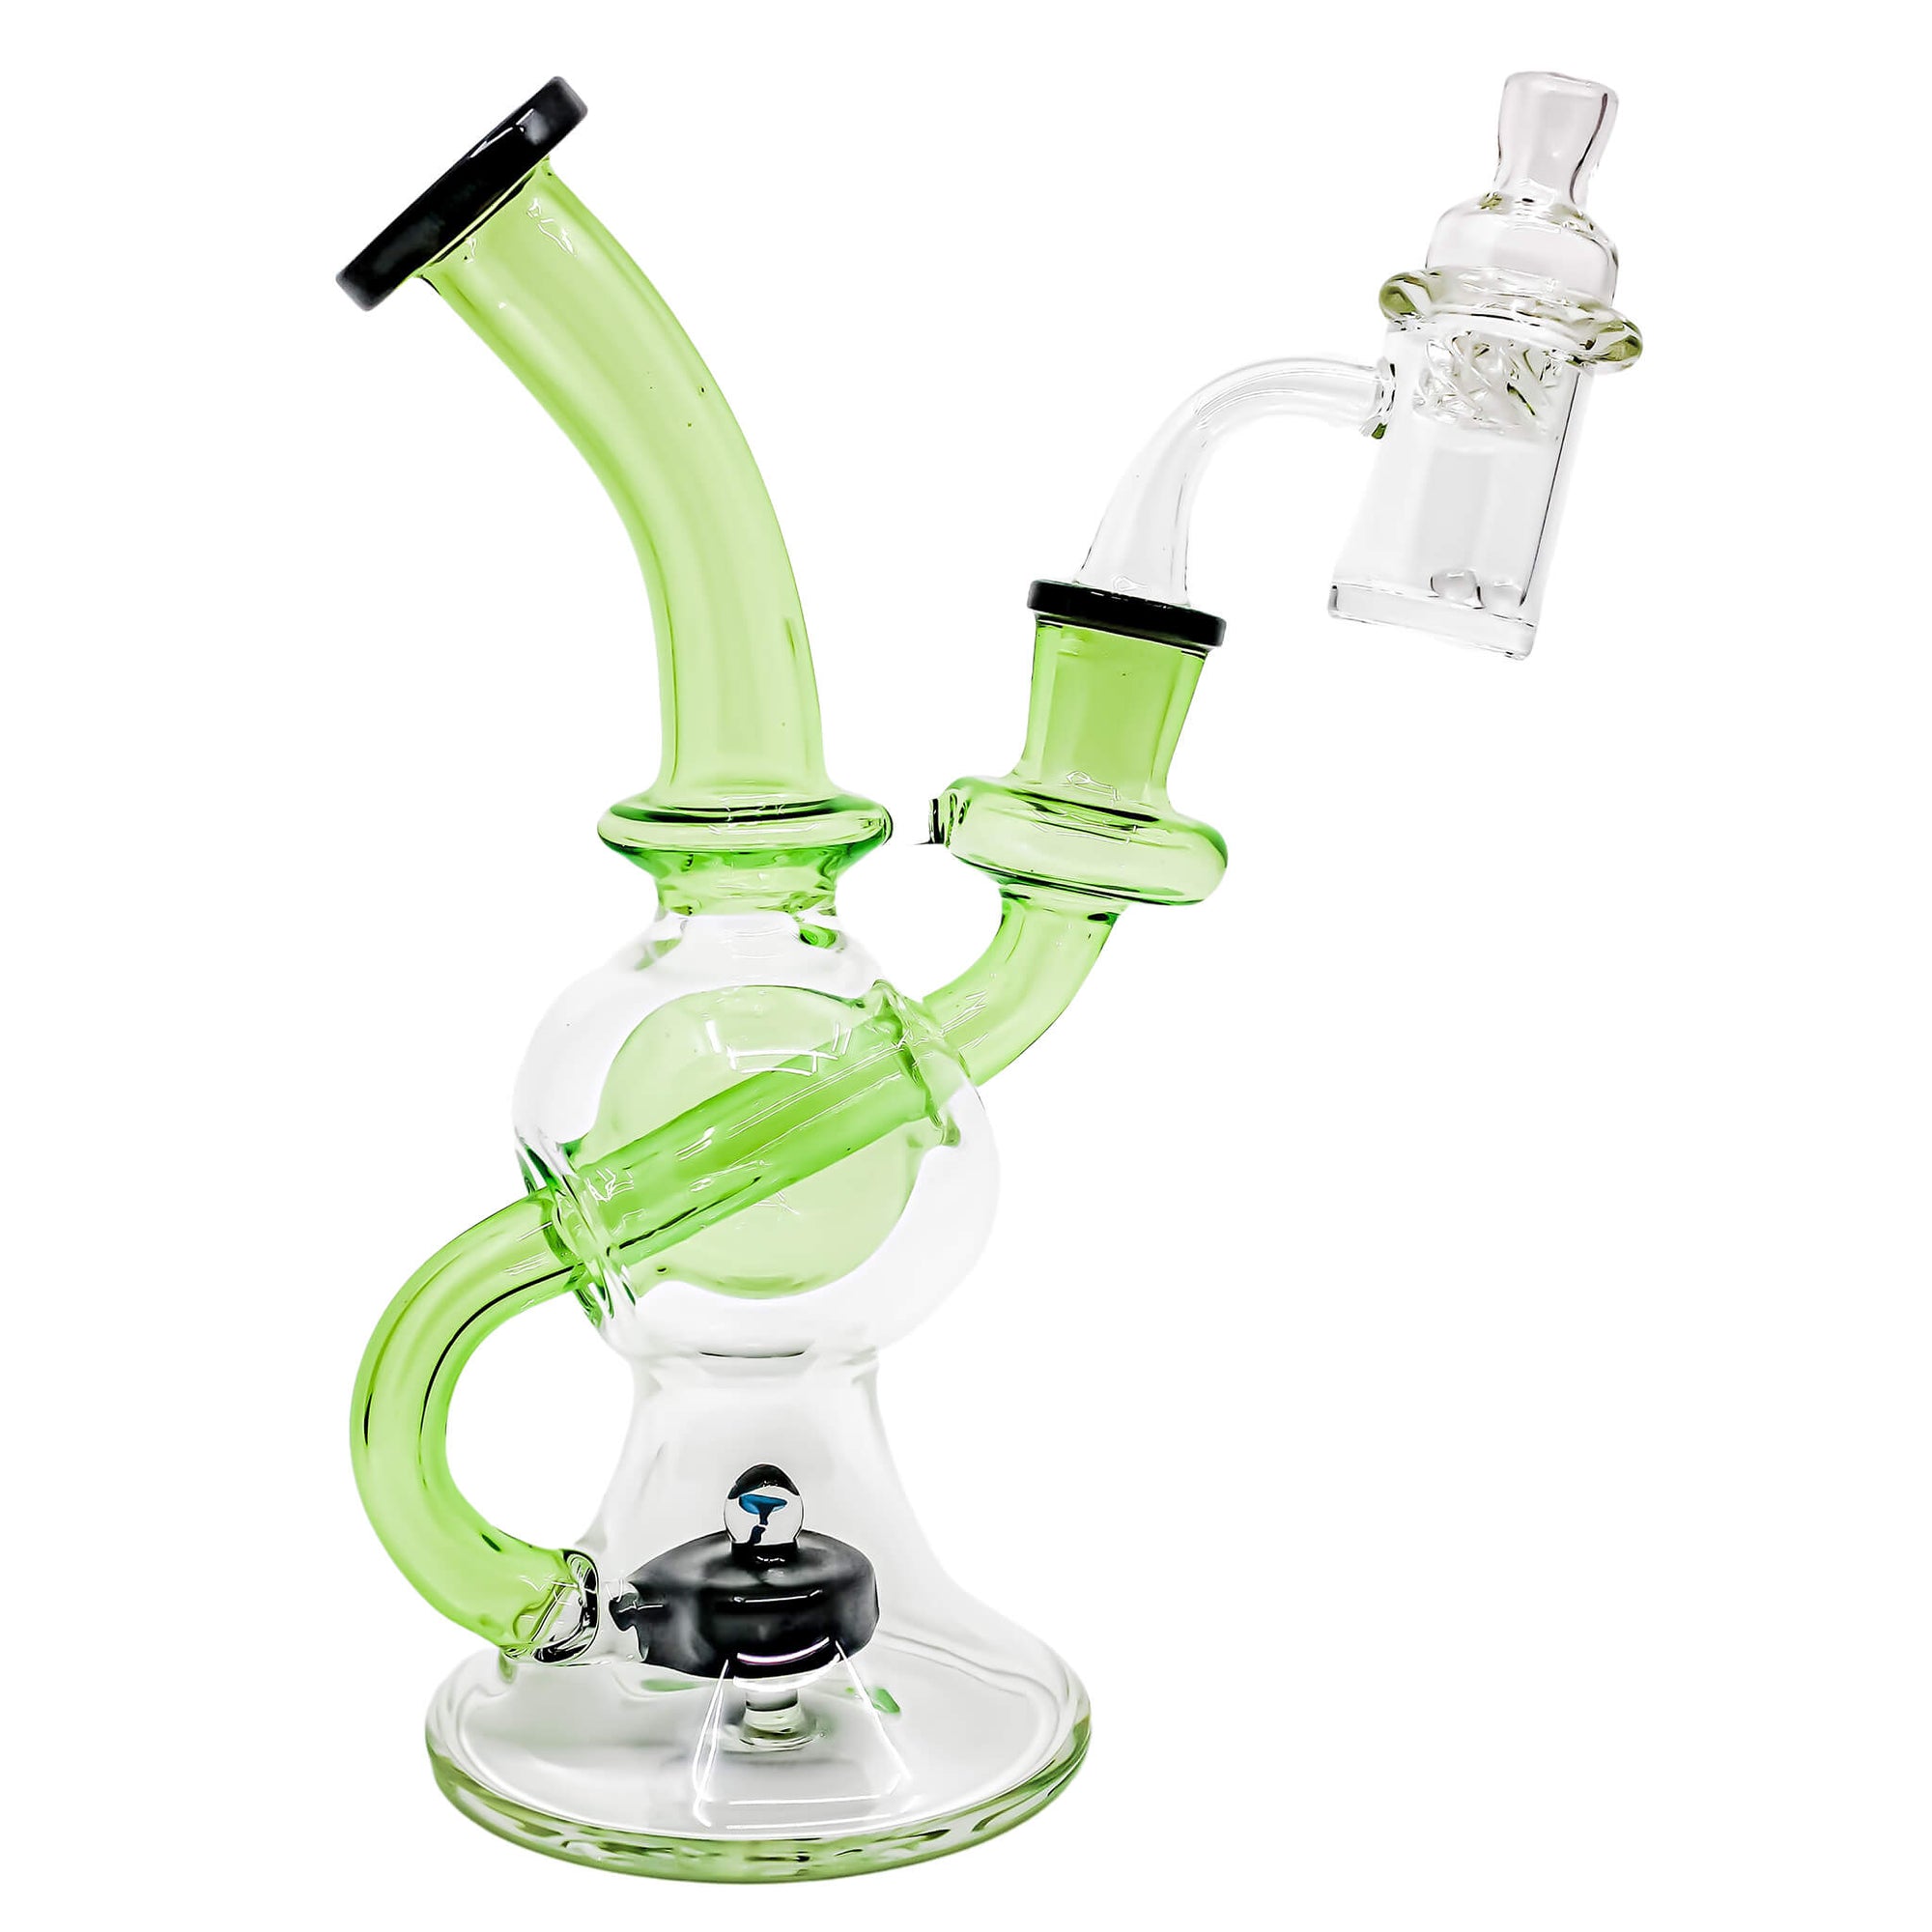 Ball Dab Rig 25mm Dab Kit | Green Rig Kit Profile View | the dabbing specialists